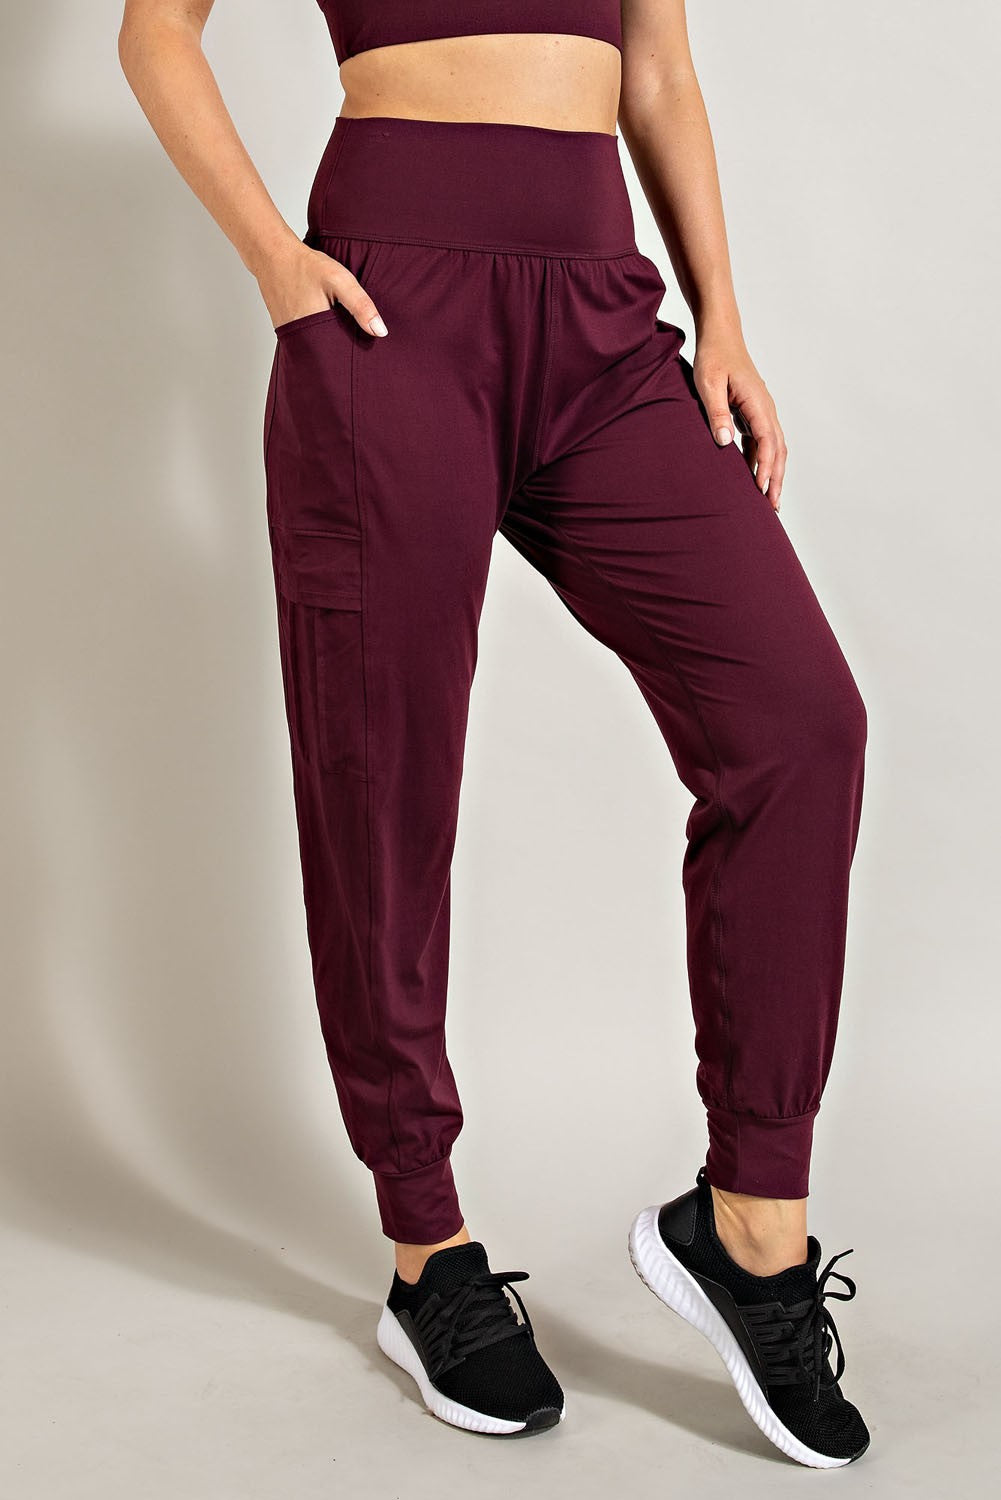 BUTTER SOFT BURGUNDY JOGGERS WITH SIDE POCKETS